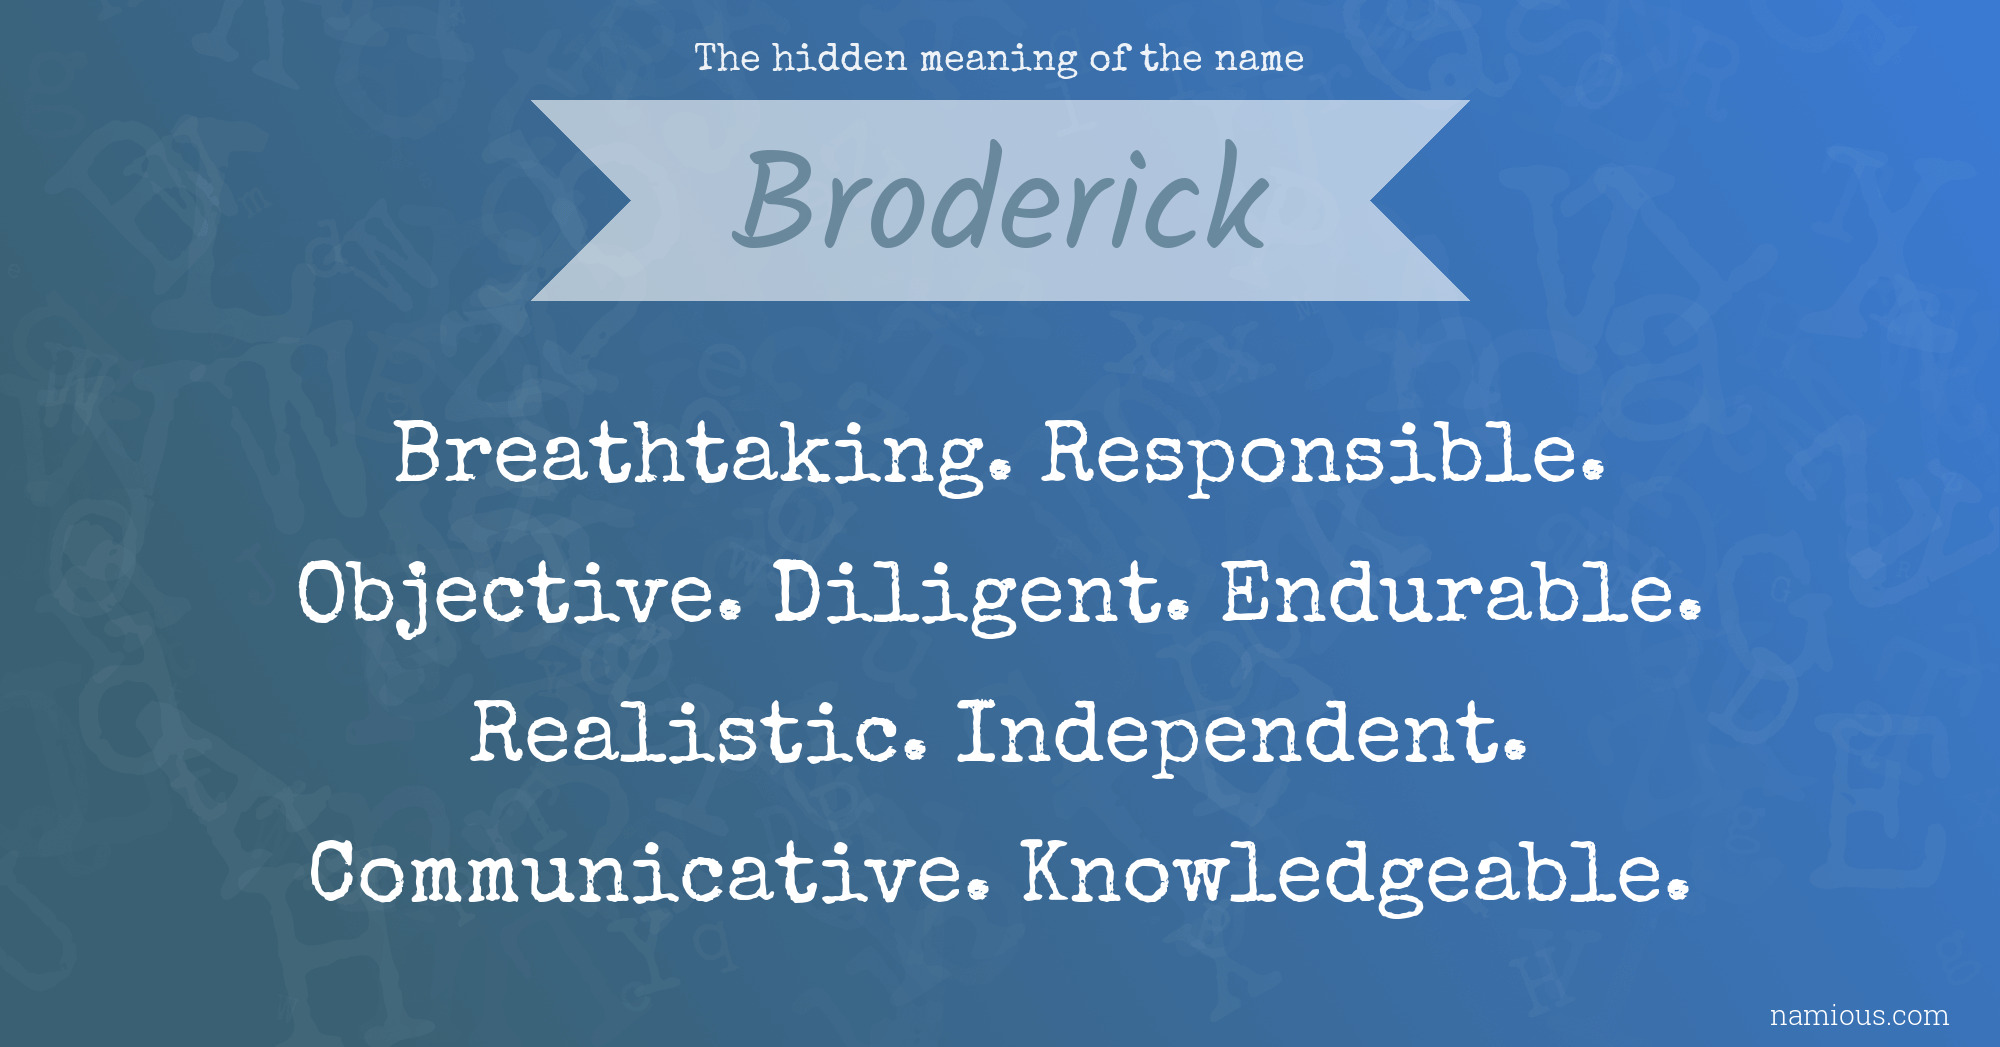 The hidden meaning of the name Broderick